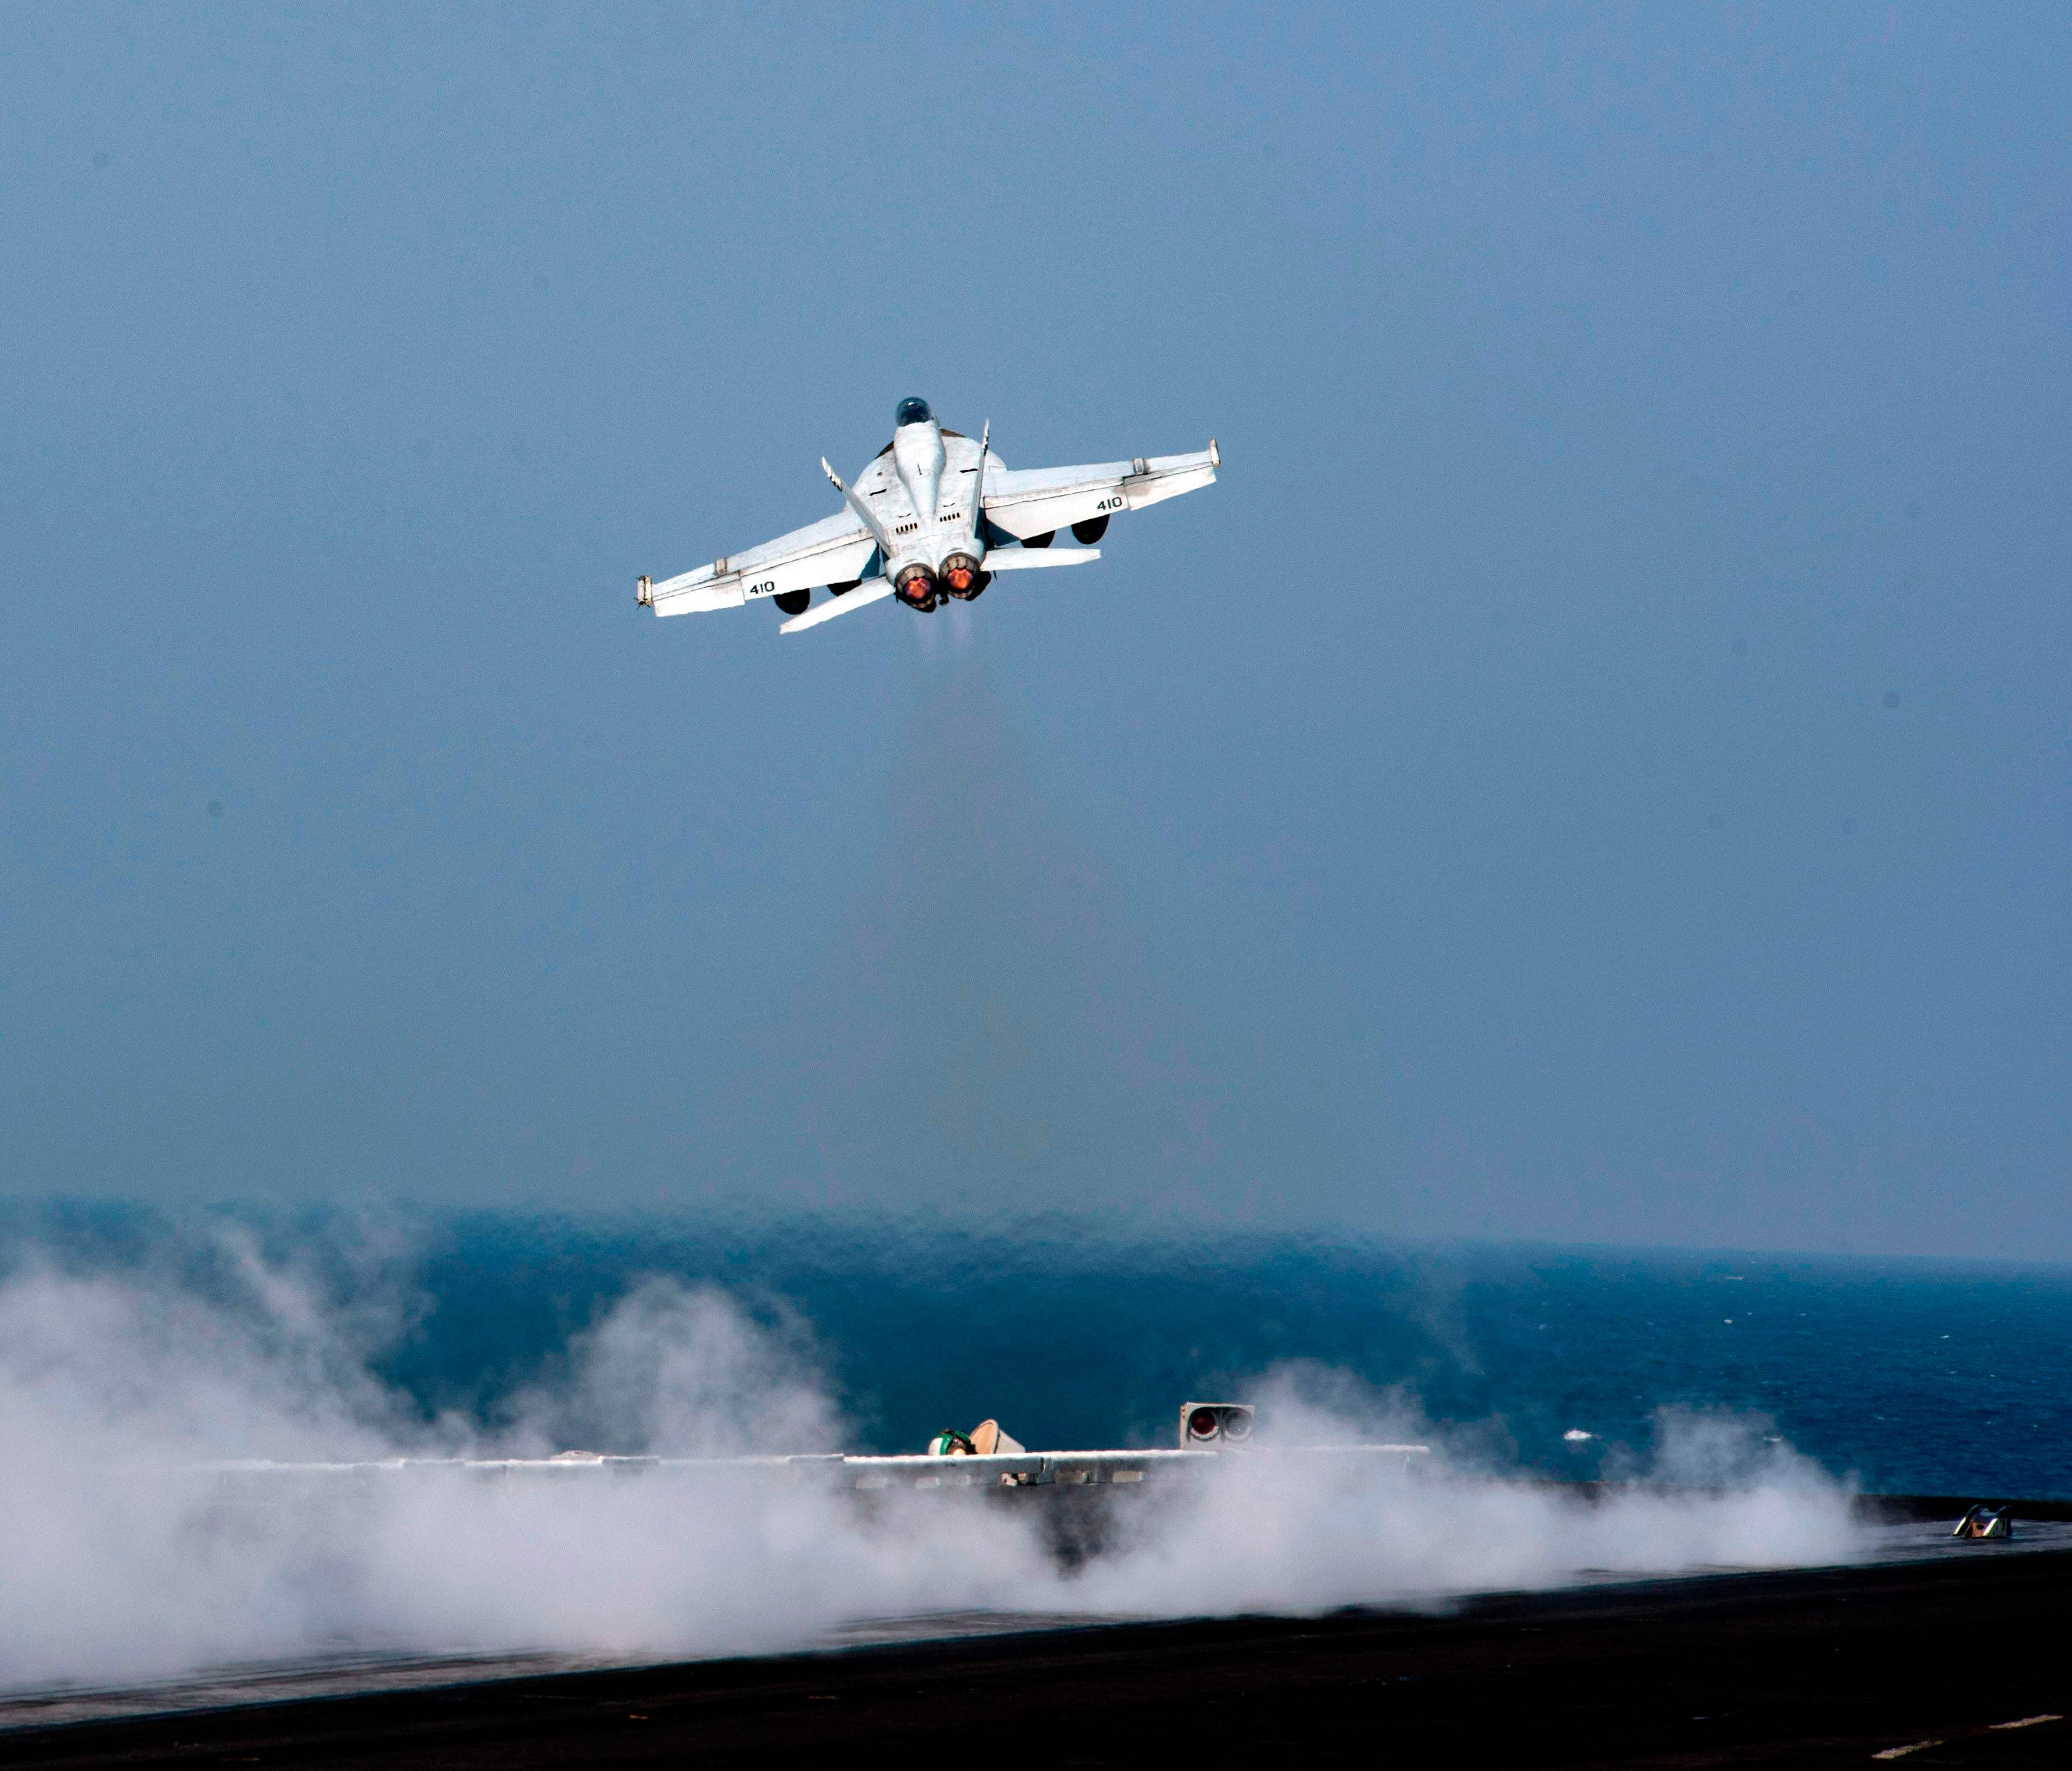 This US Navy photo released October 21, 2016 shows an F/A-18E Super Hornet launching from the flight deck of the aircraft carrier USS Dwight D. Eisenhower on October 20, 2016 in the Gulf.   A US F/A-18E Super Hornet shot down a Syrian regime plane on 